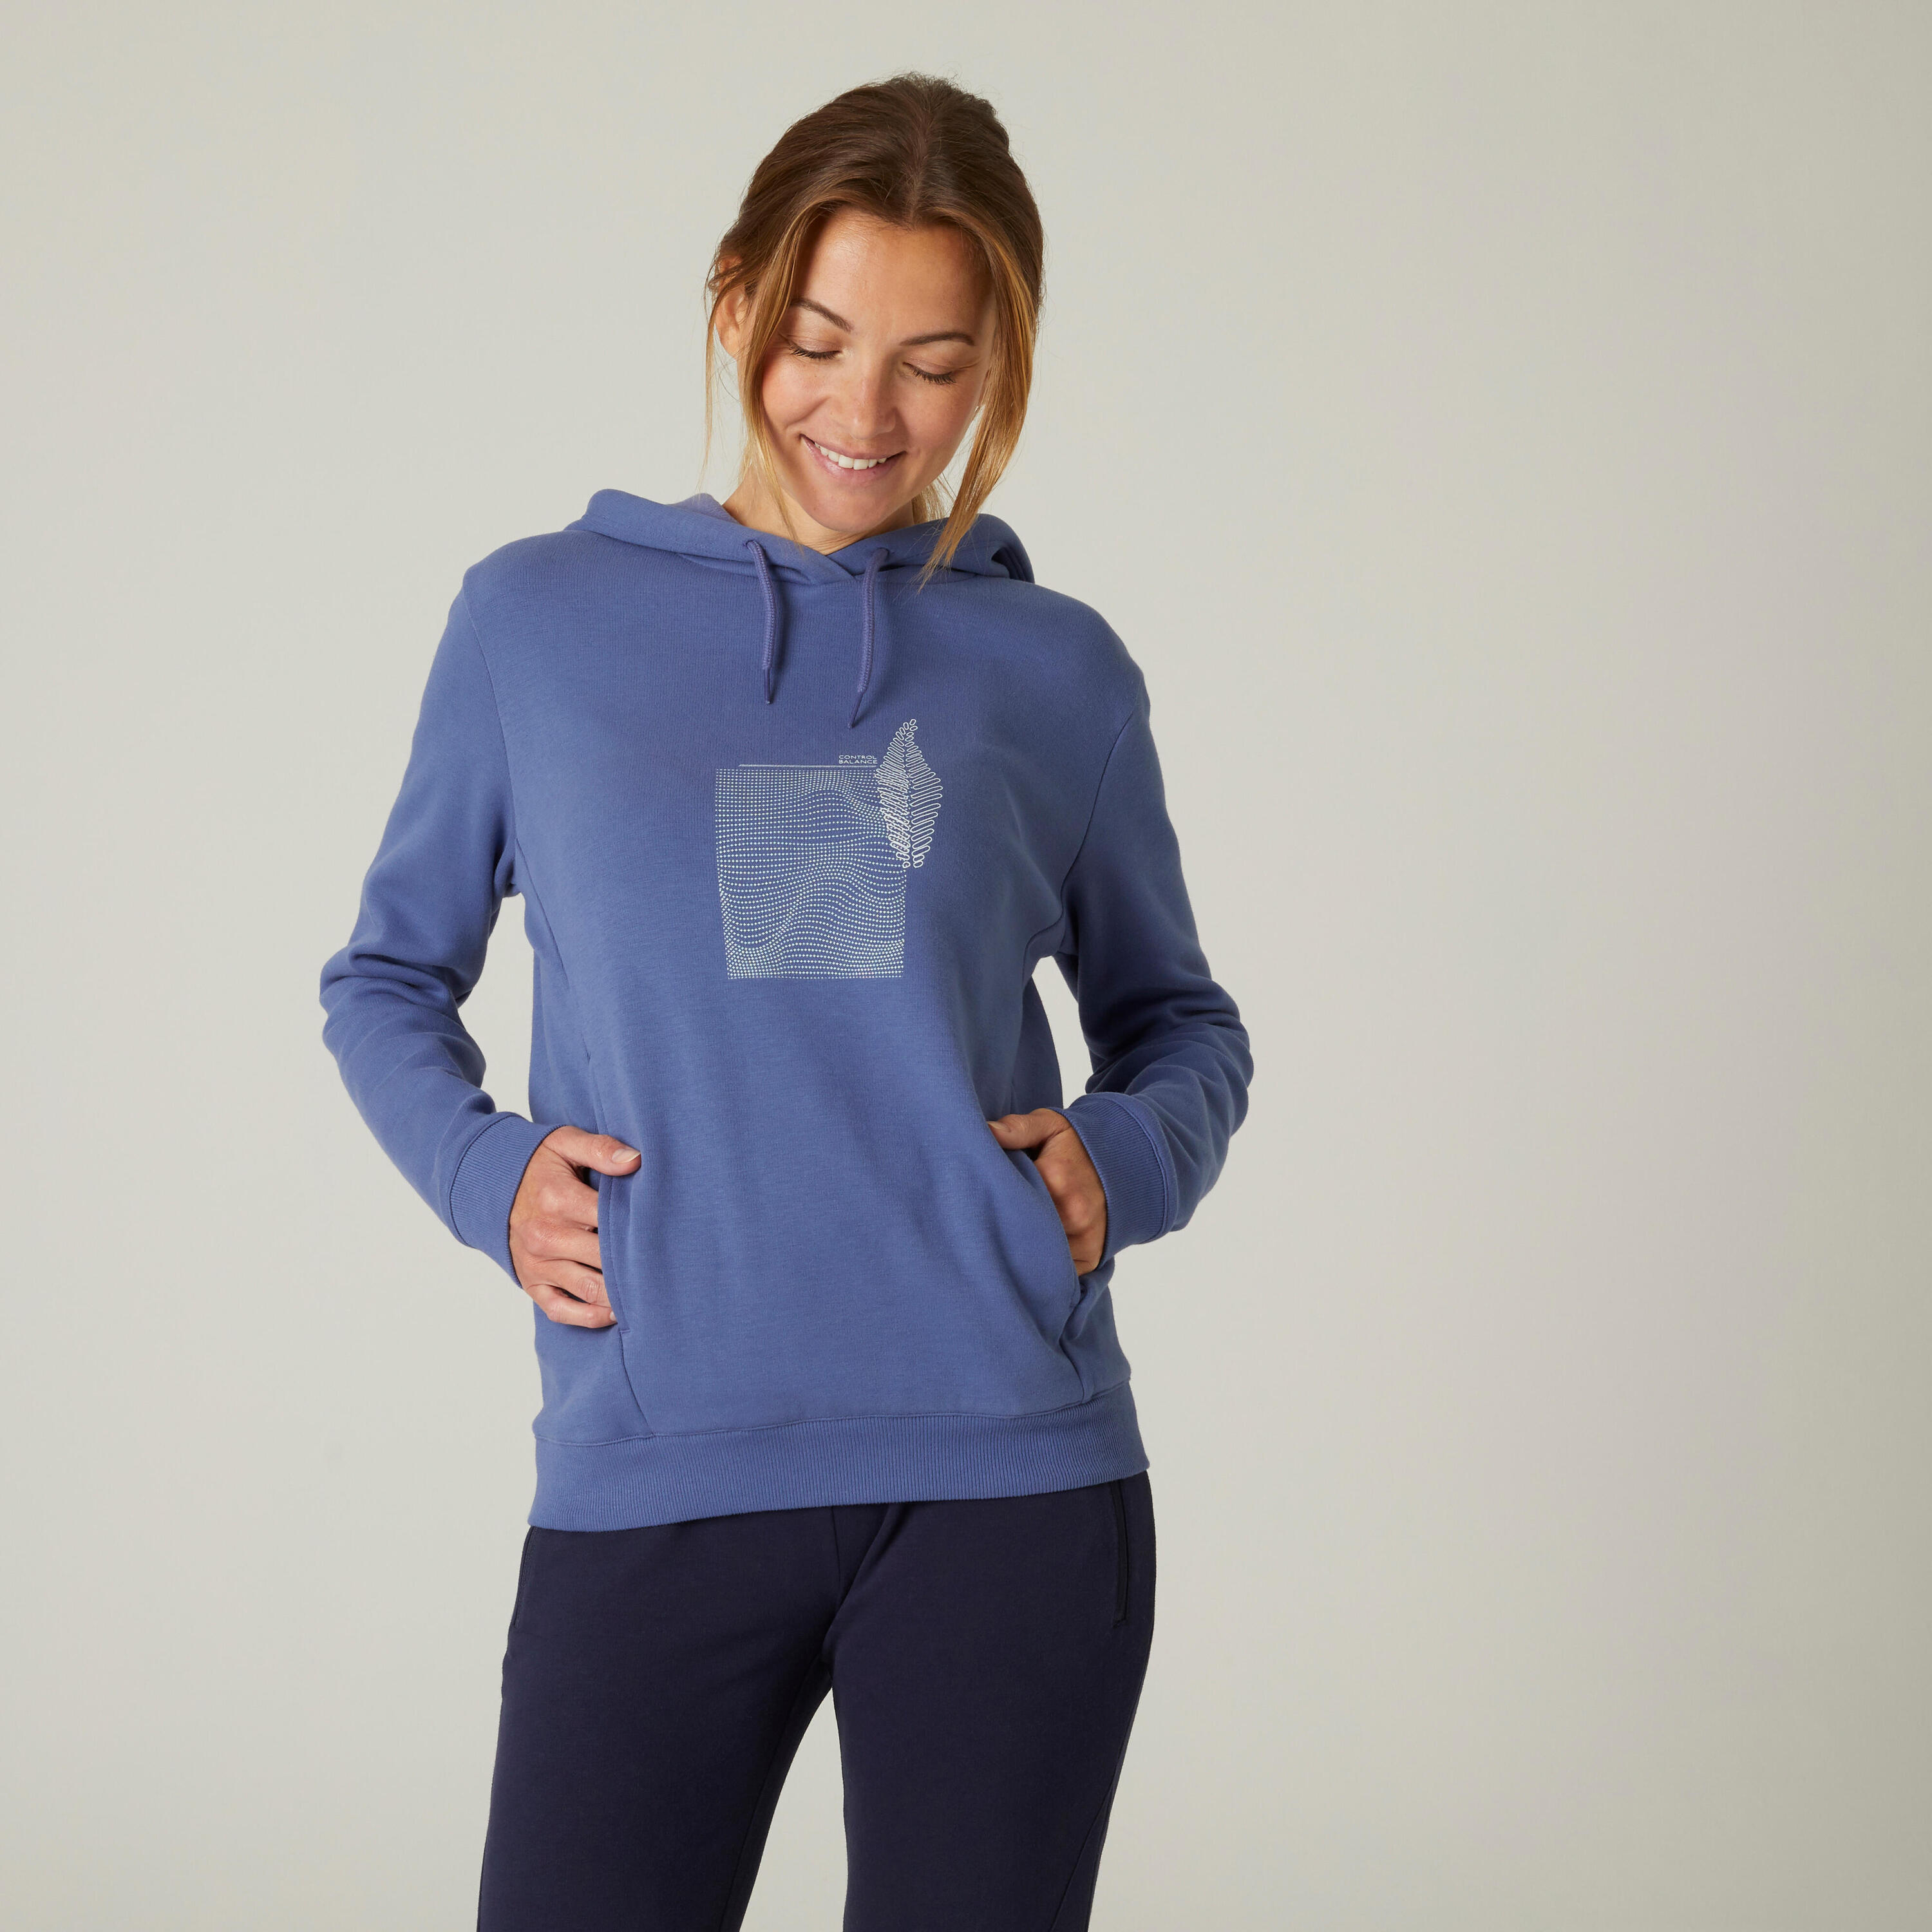 DOMYOS Women's Fitness Hoodie 520 - Blue with Print